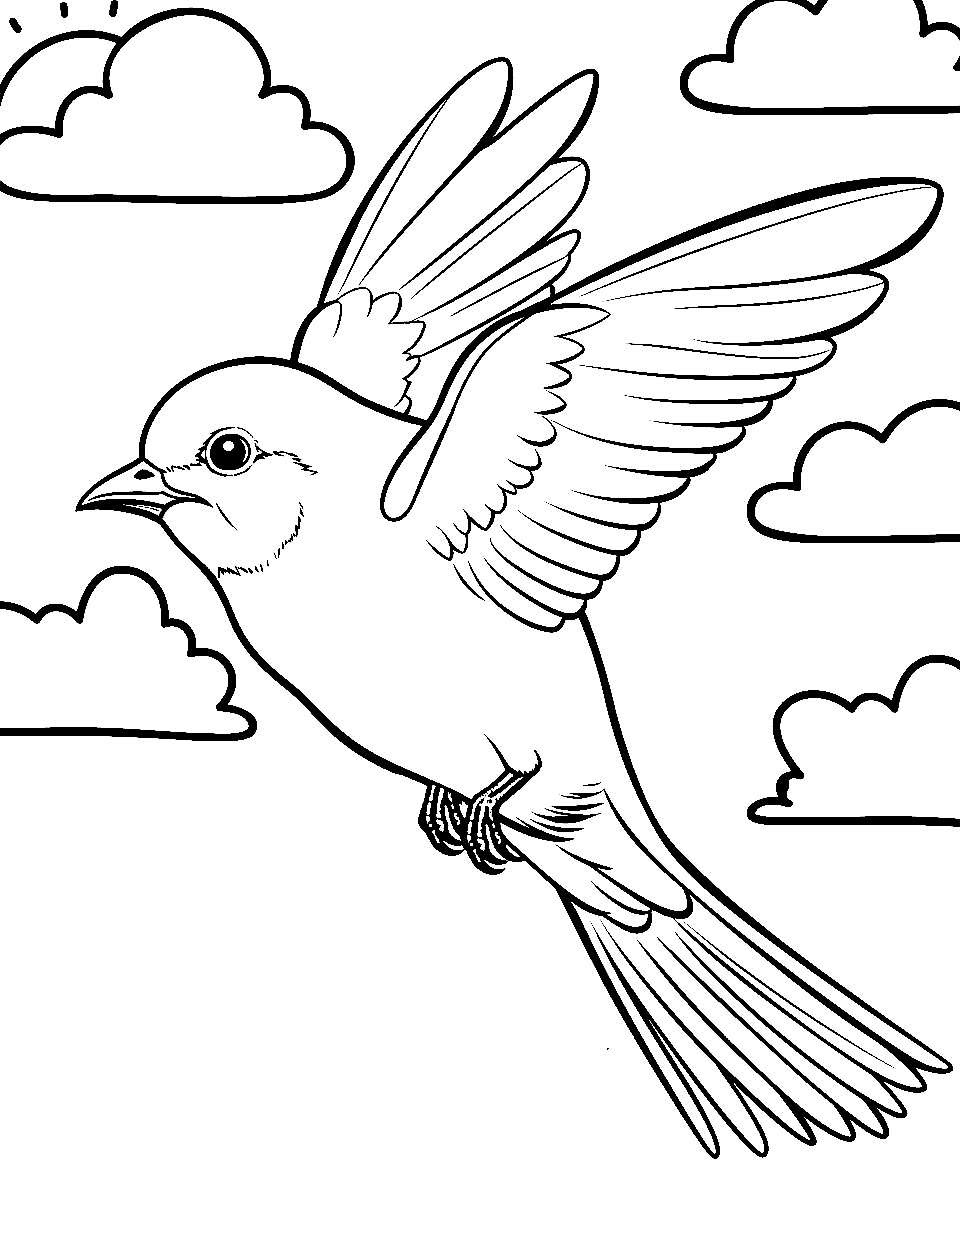 Swallow's Graceful Glide Coloring Page - A swallow gliding smoothly against a clouded sky.